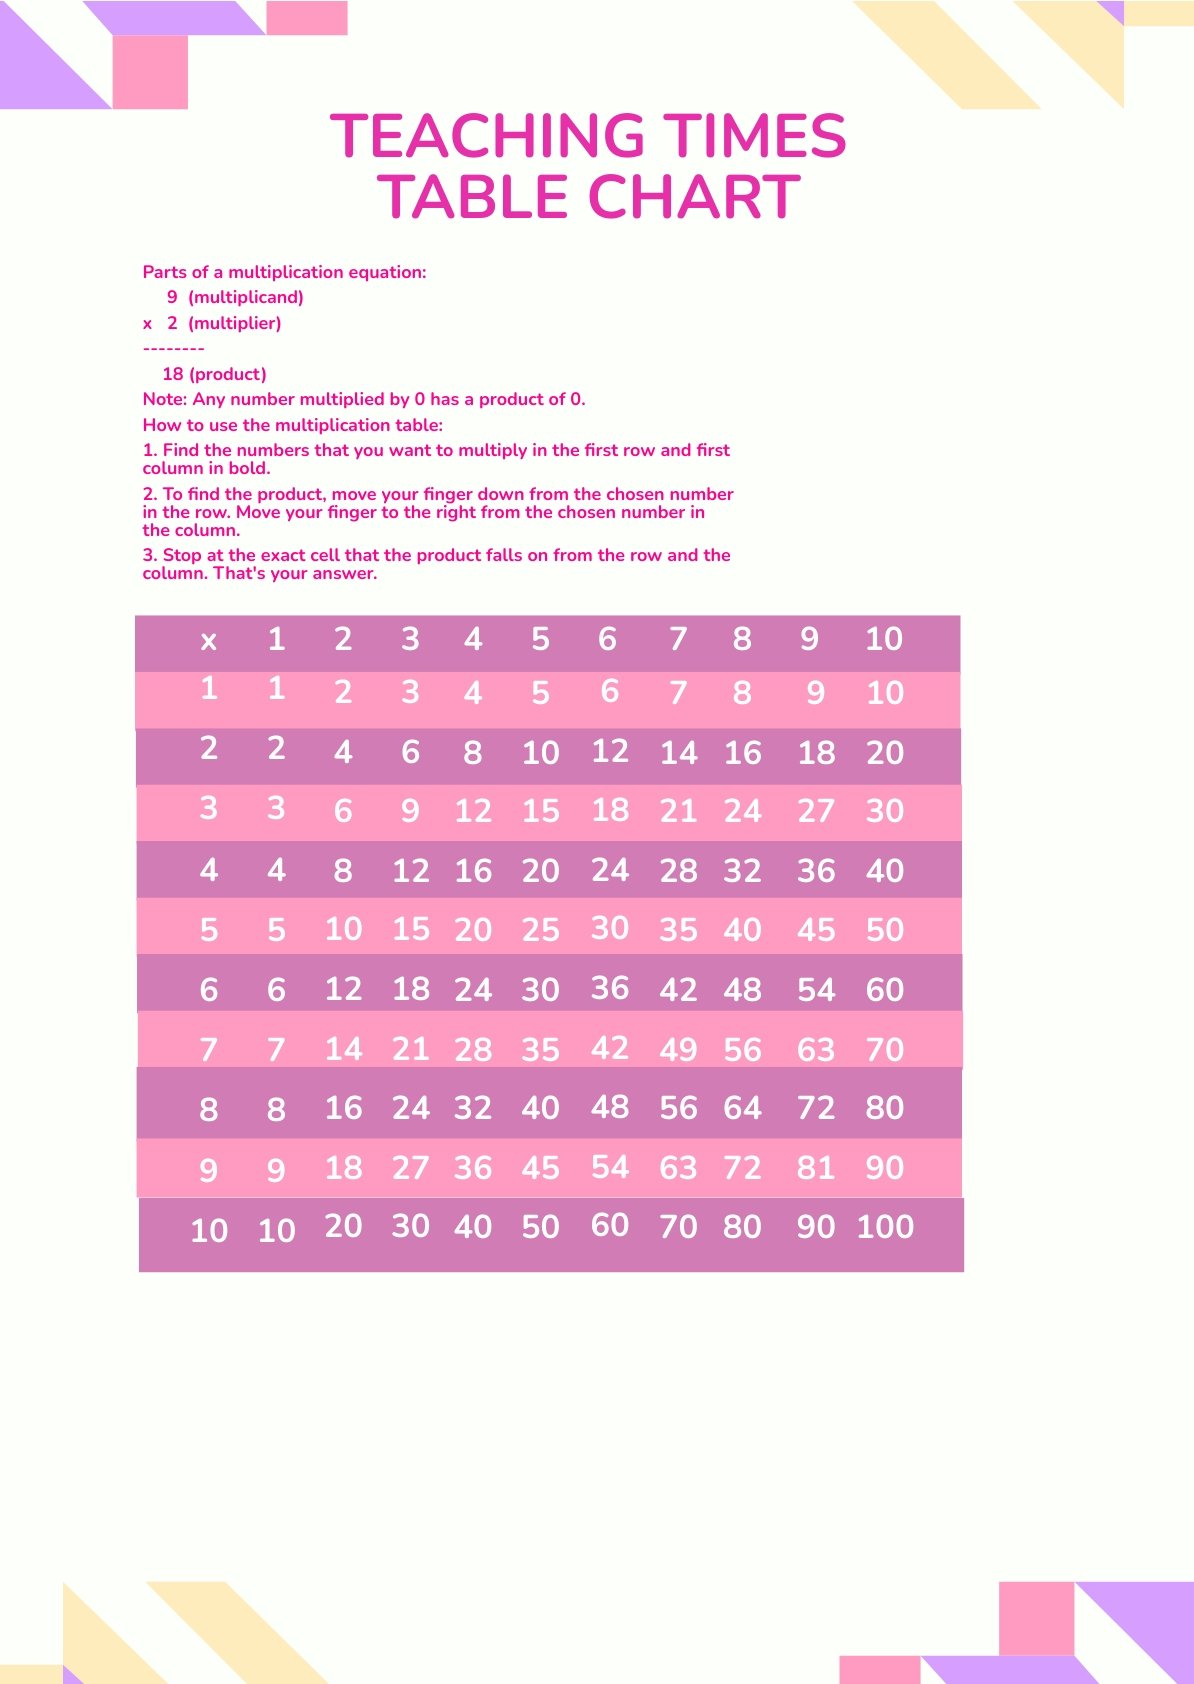 Teaching Times Table Chart Template